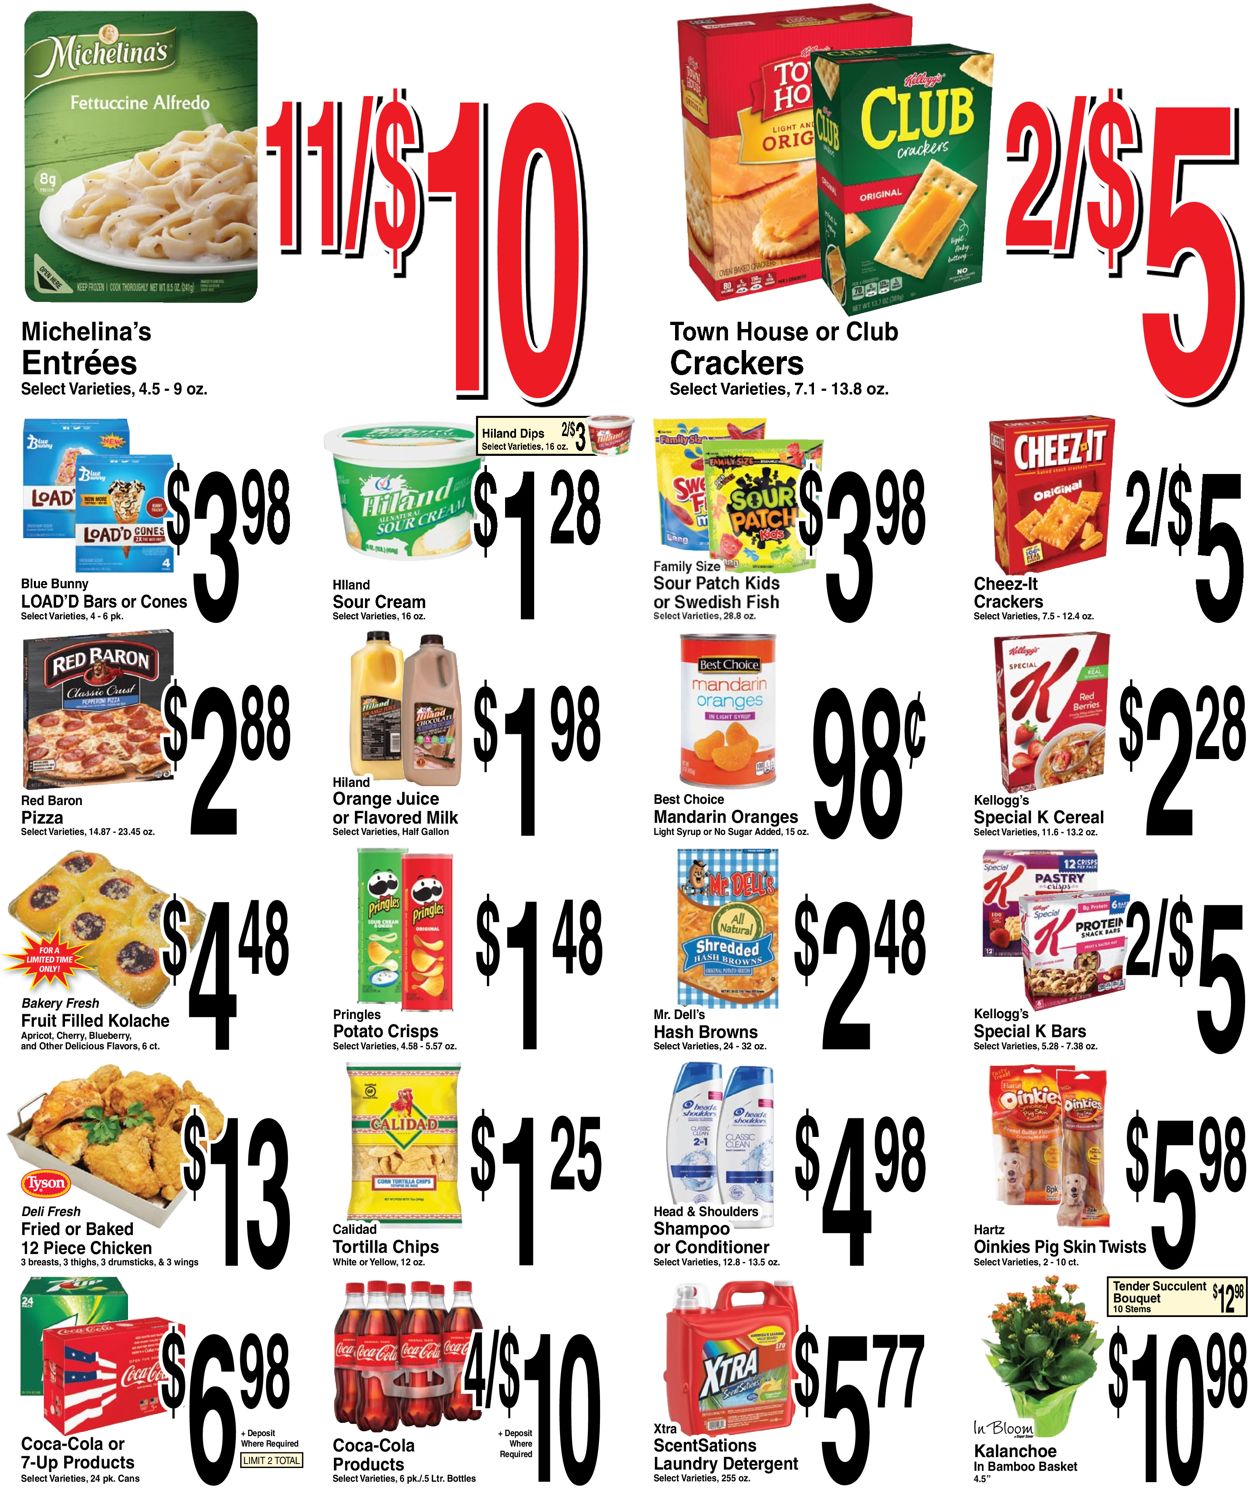 Catalogue Super Saver from 07/28/2021